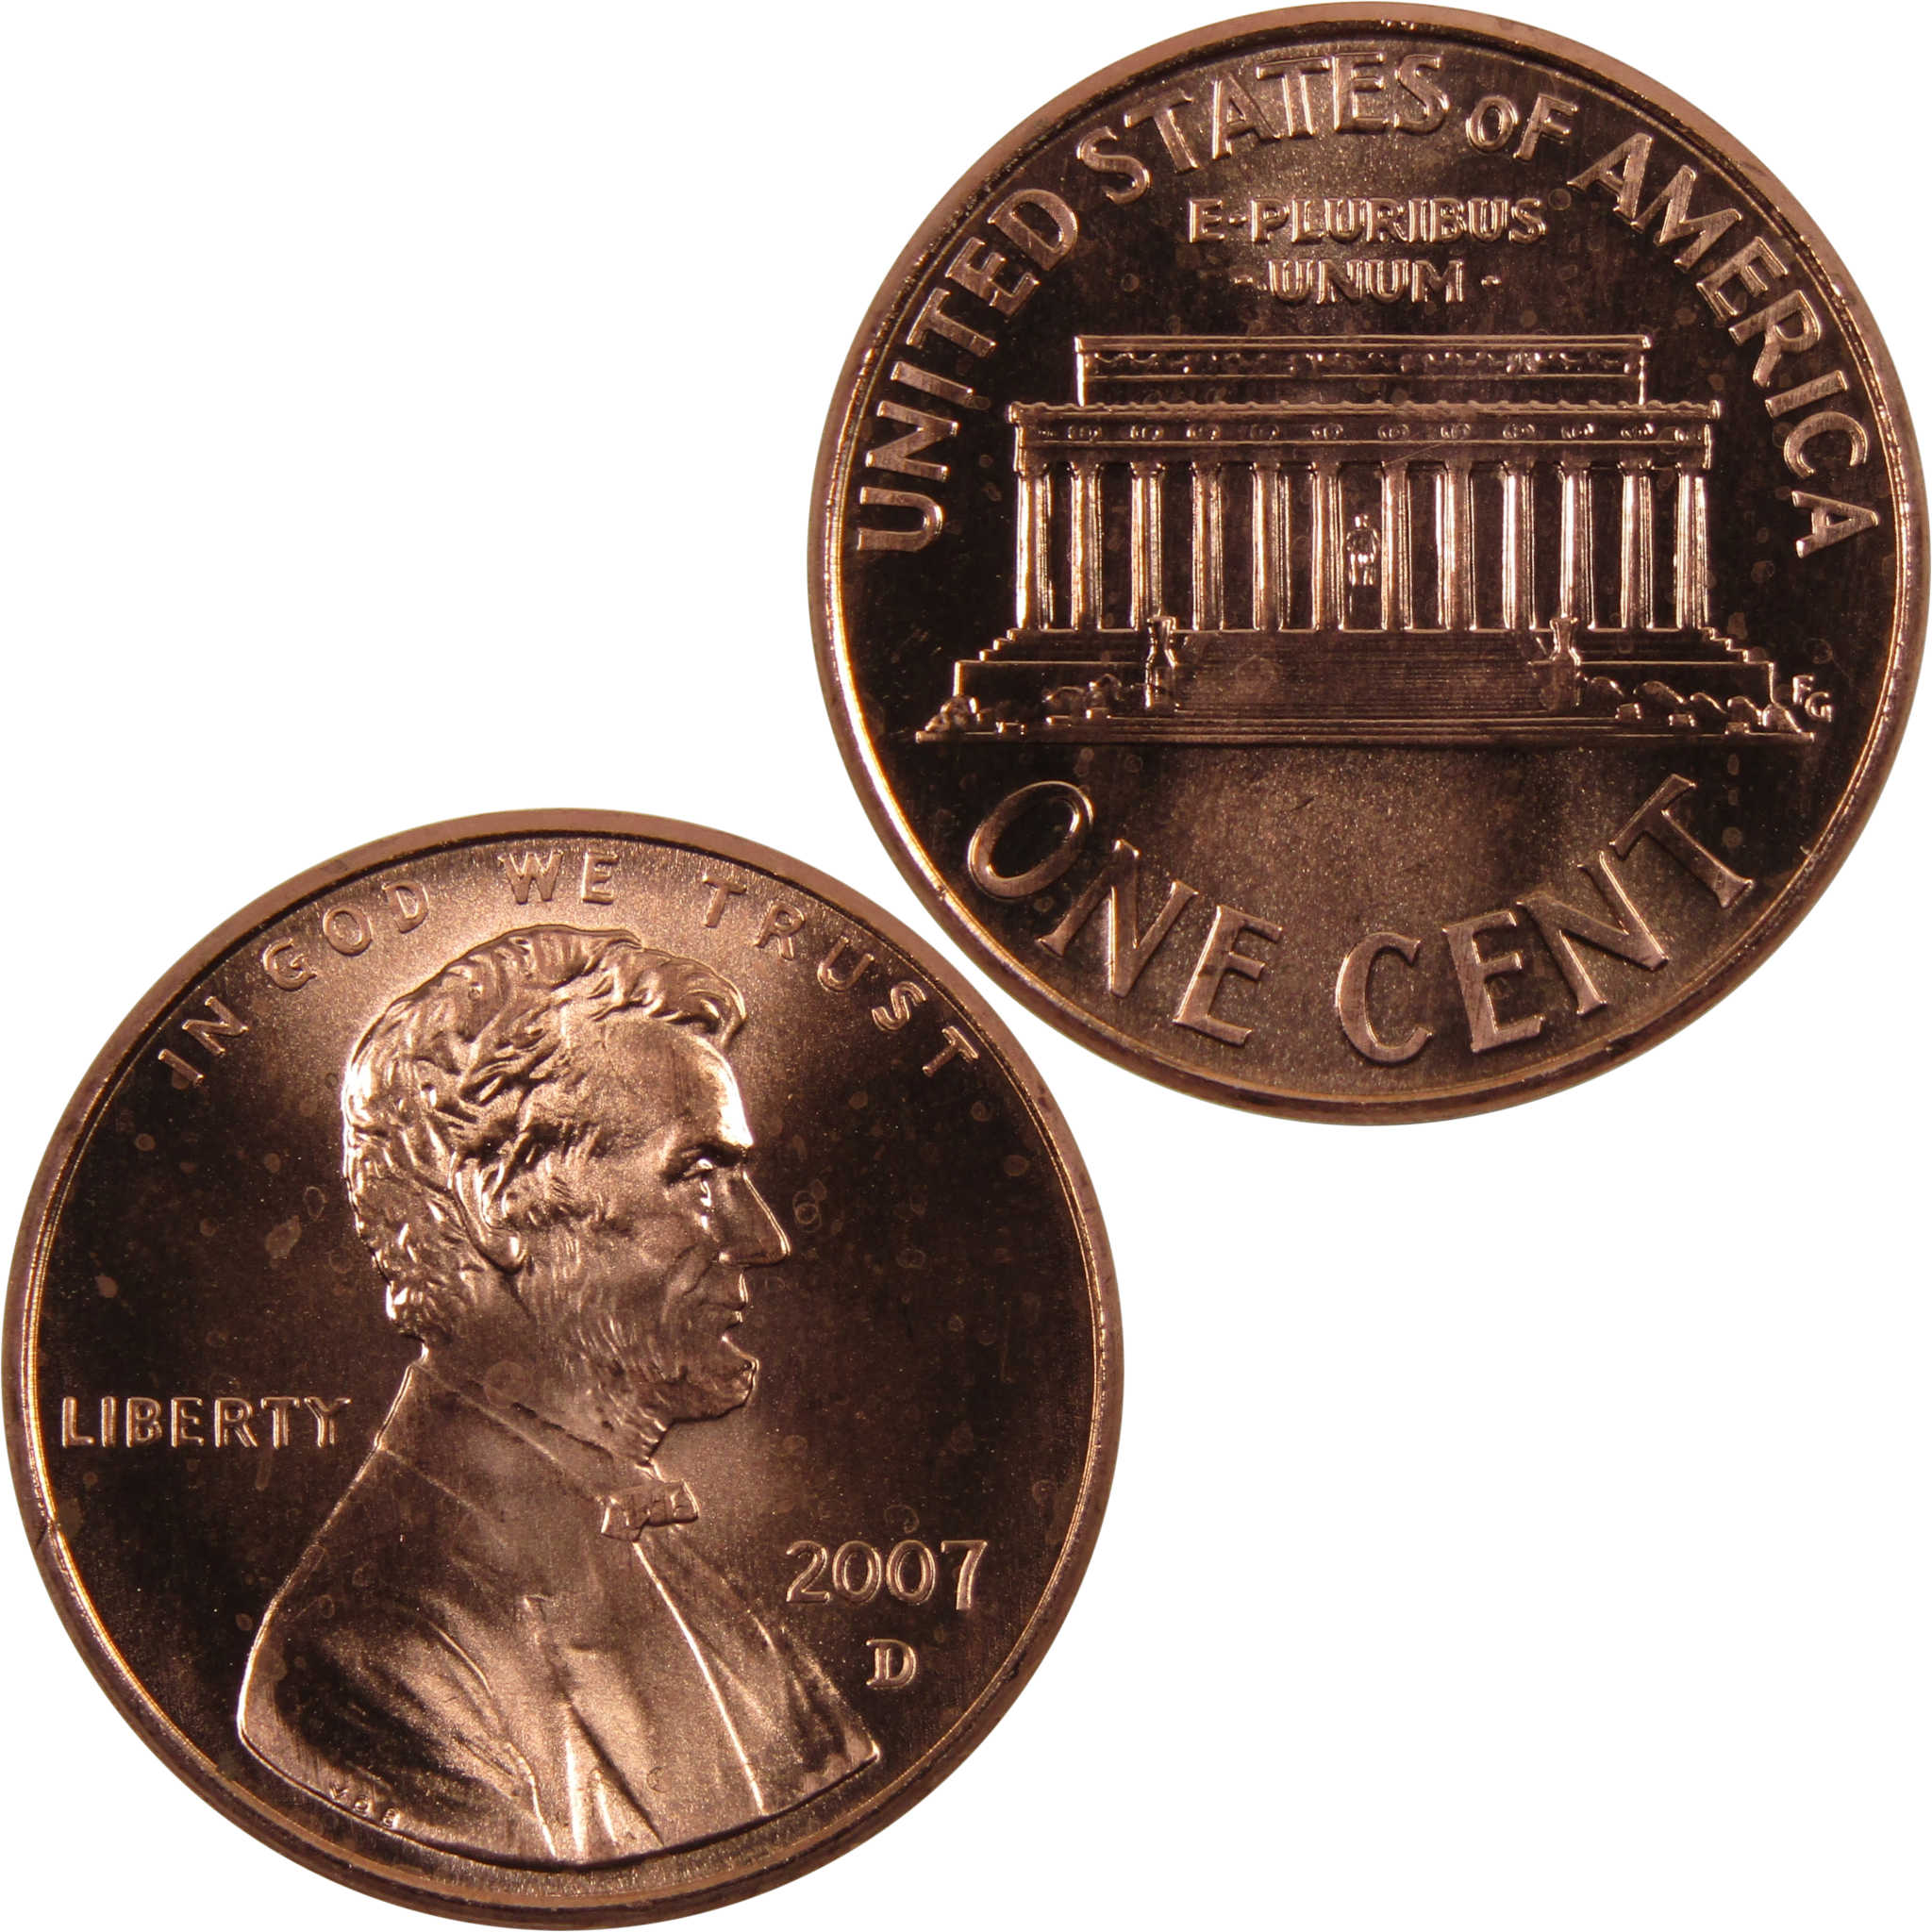 2007 D Lincoln Memorial Cent BU Uncirculated Penny 1c Coin